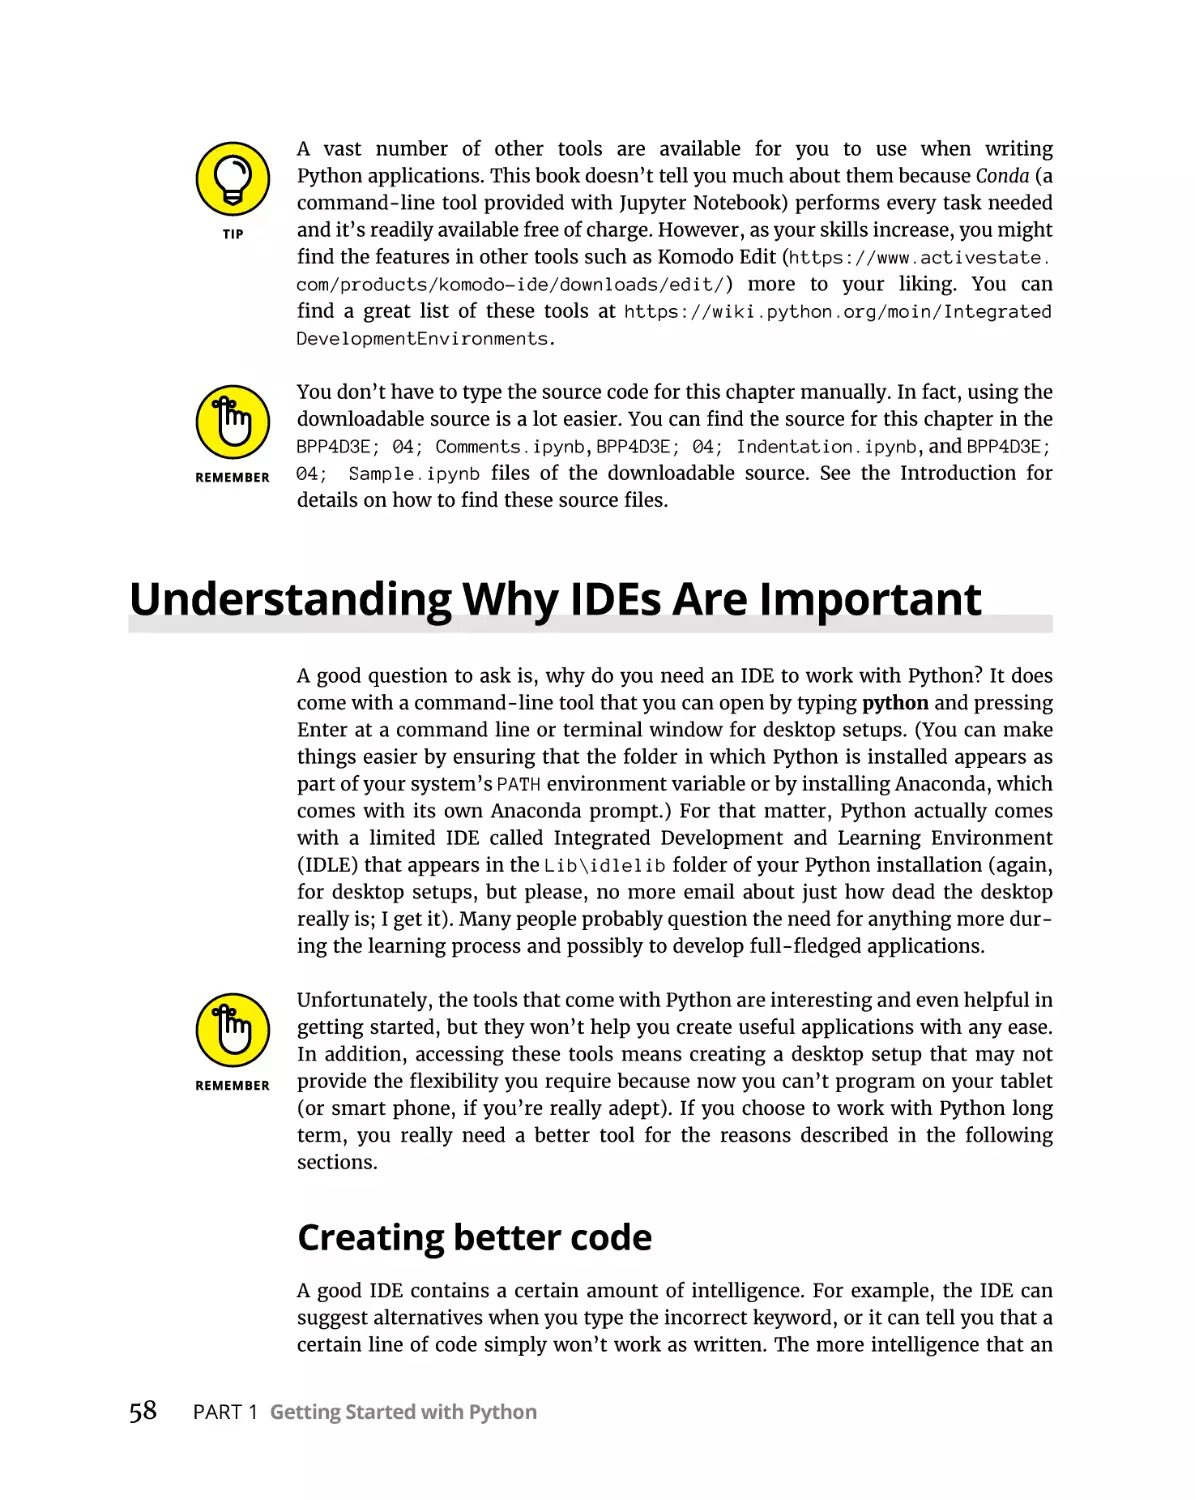 Understanding Why IDEs Are Important
Creating better code